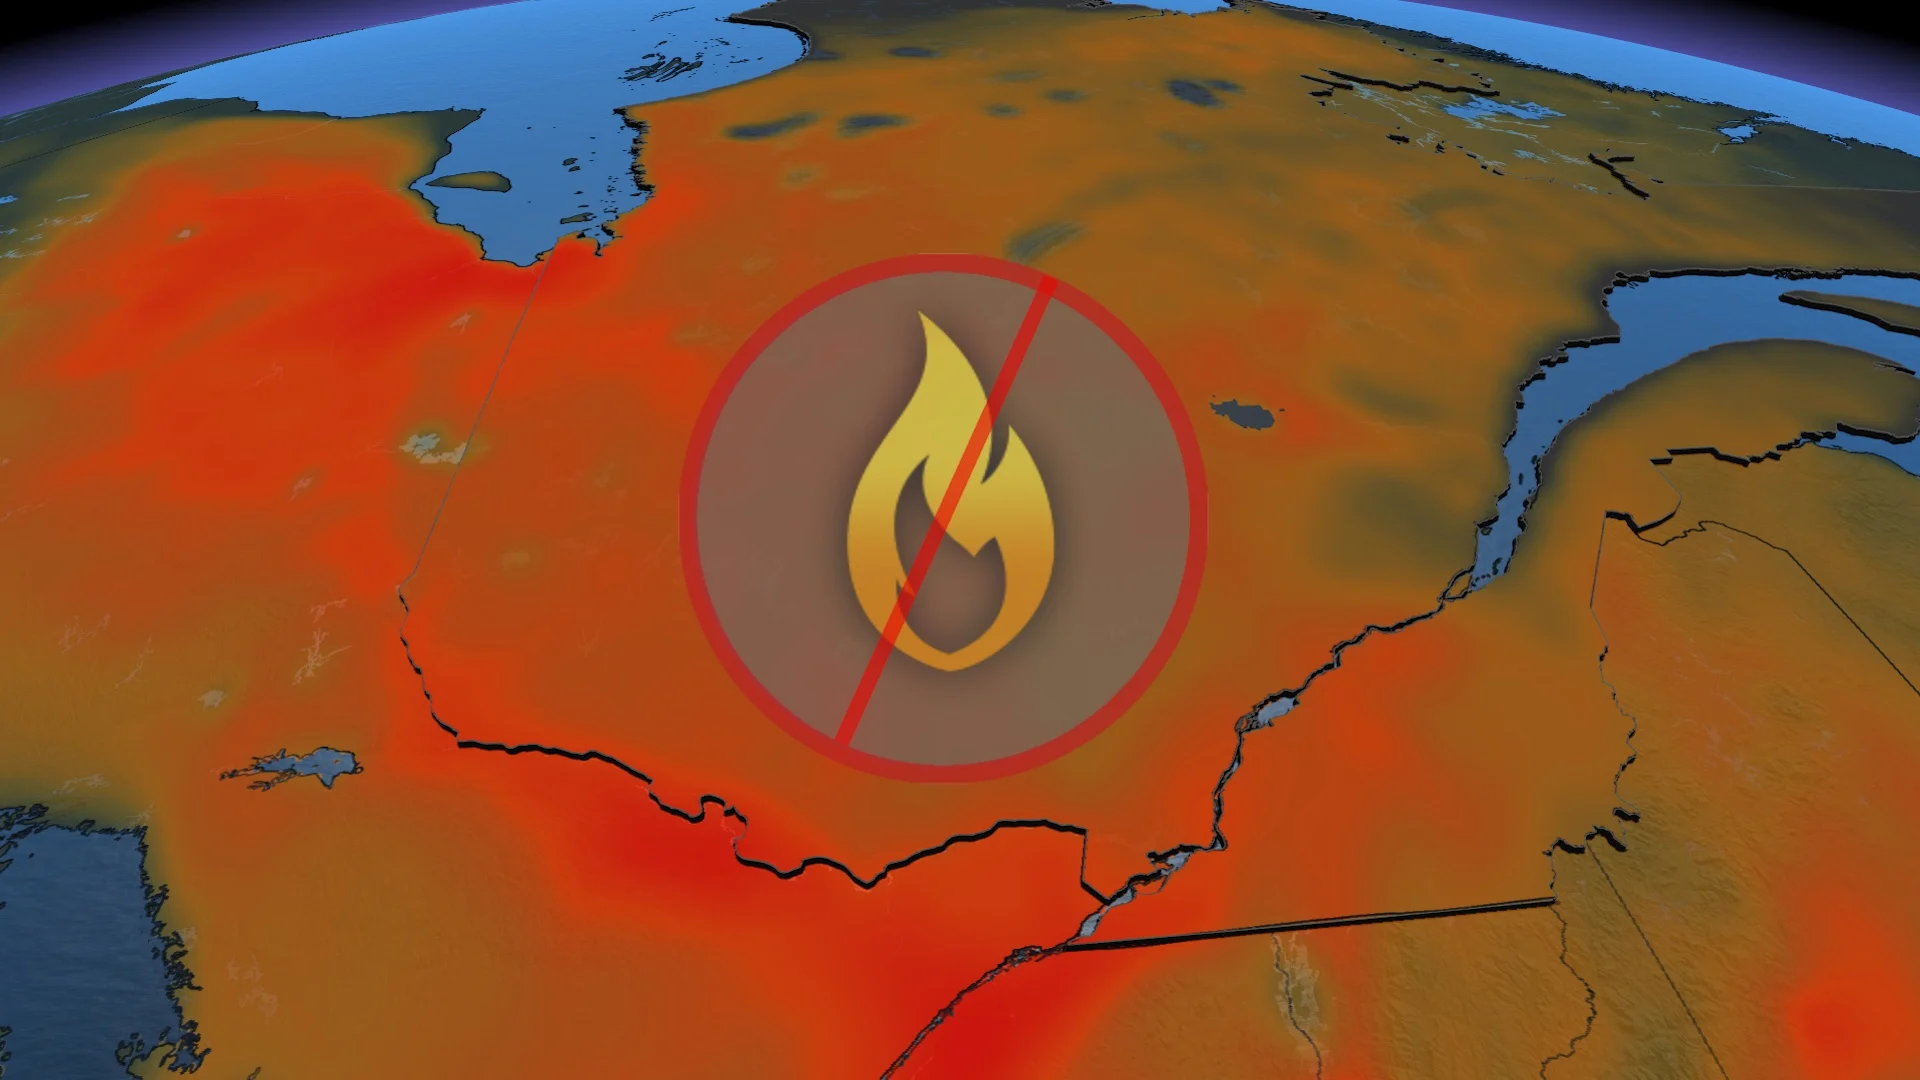 Most of Quebec is facing a high forest fire threat due hot and dry conditions this month. Details, here